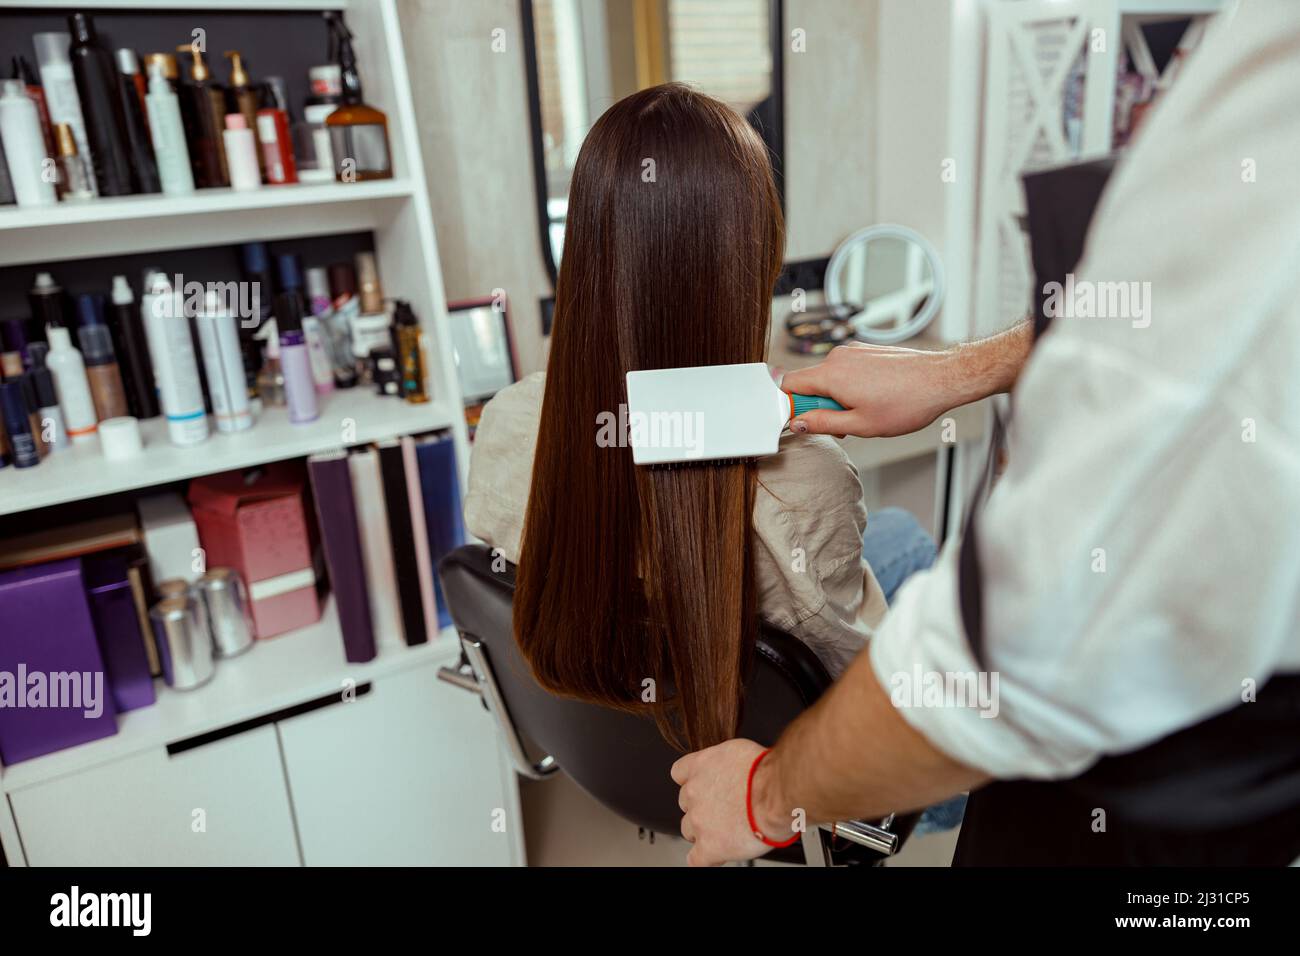 Hairstylist brushing long and sleek brown hair of female client at beauty salon Stock Photo